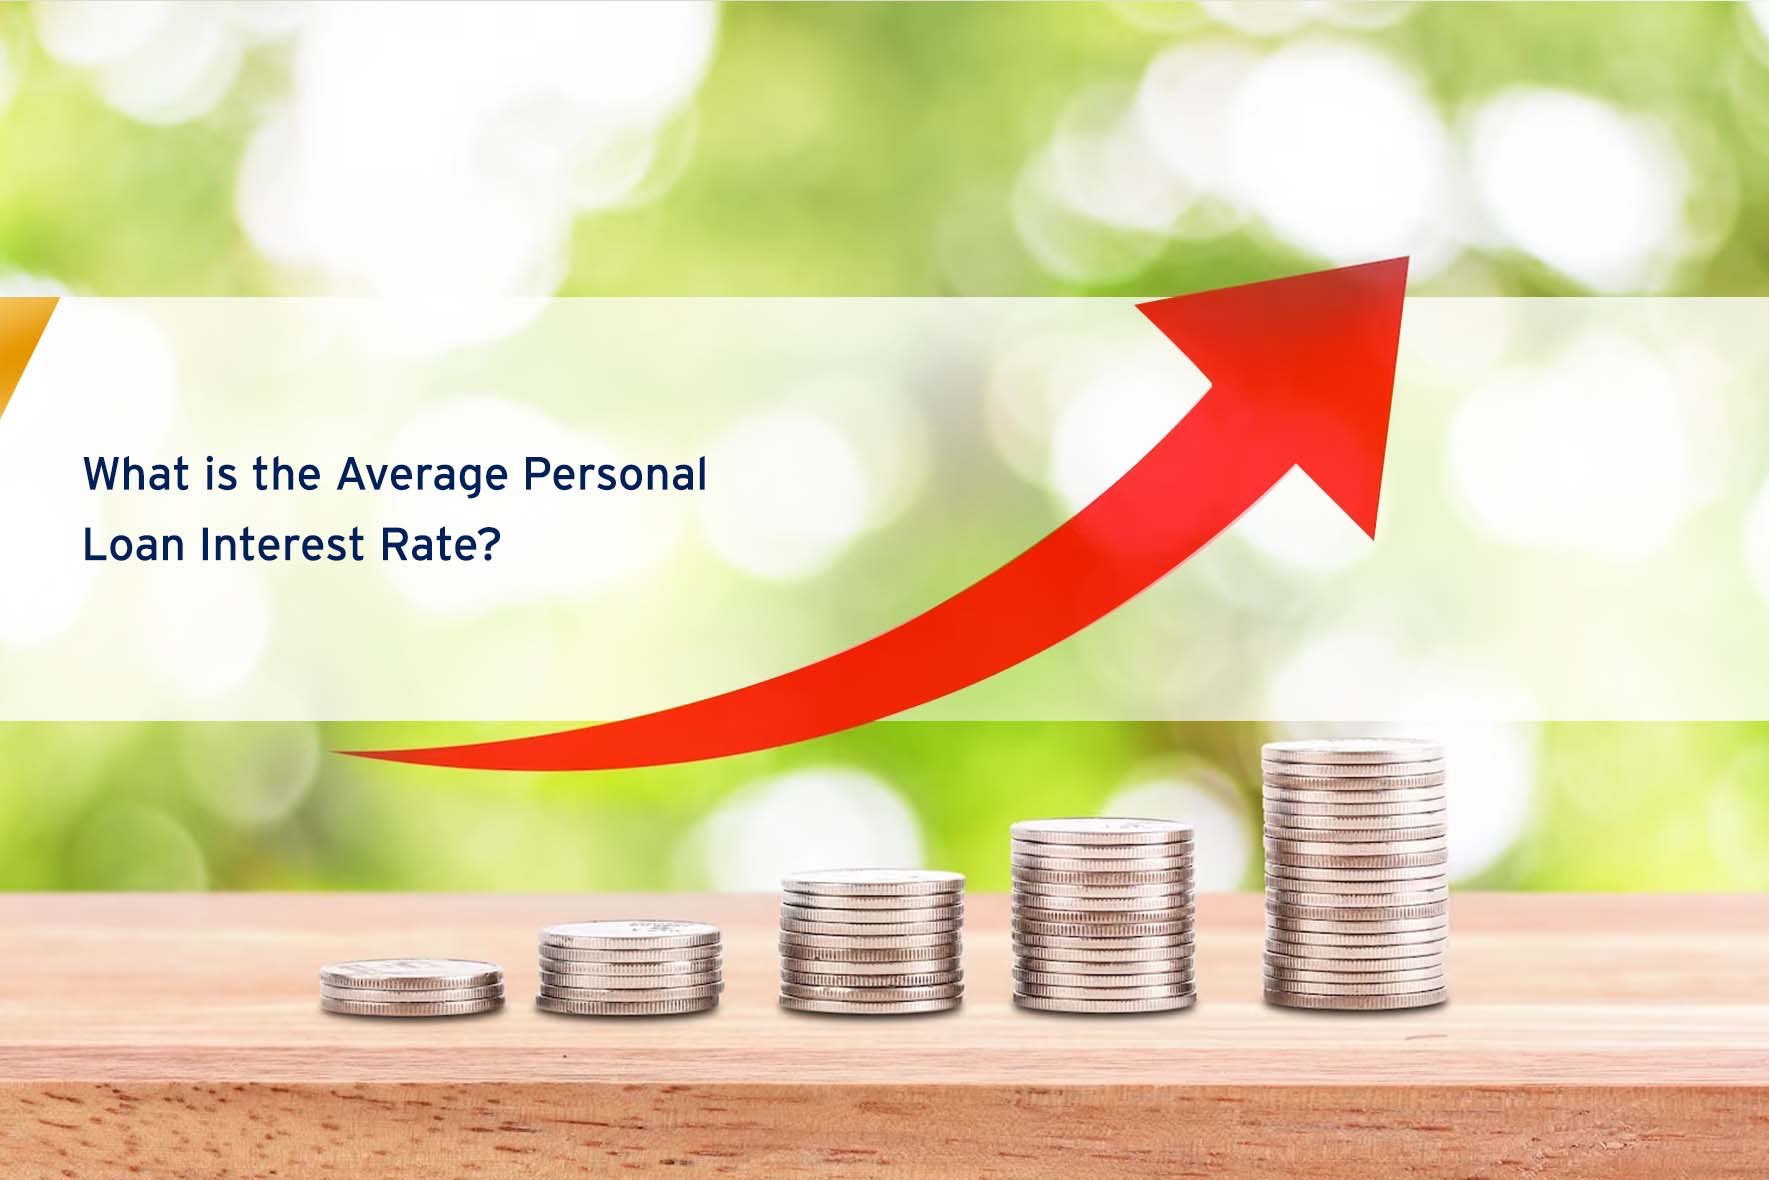 What is the Average Personal Loan Interest Rate?